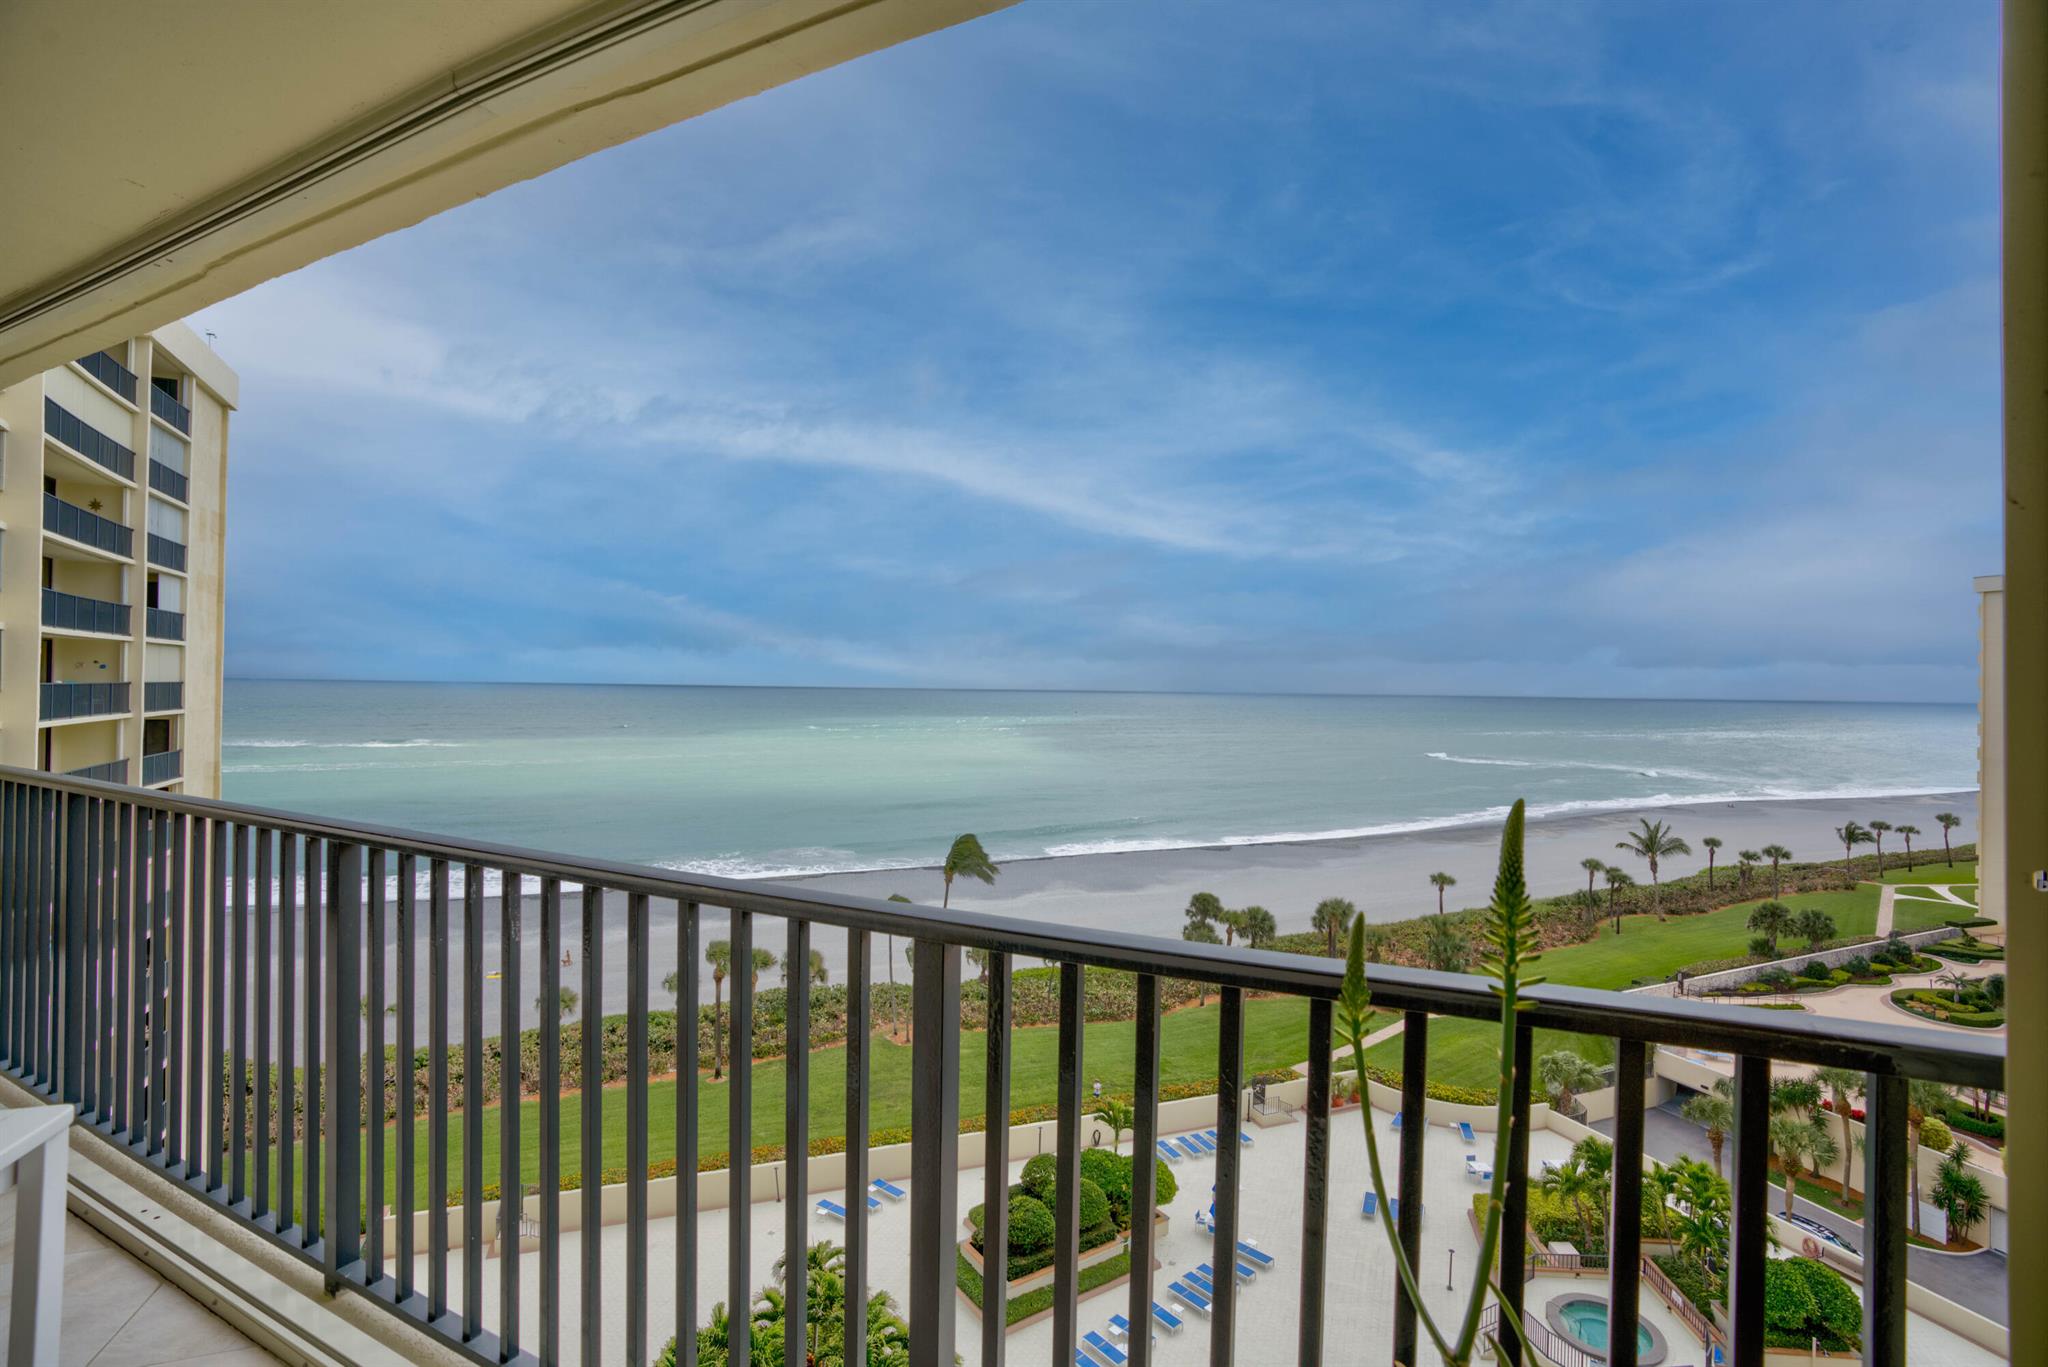 Breathtaking views from this beautifully renovated 10th floor direct oceanfront condo offering panoramic ocean views from the Jupiter Inlet to the Juno Beach Pier. Completely updated within past 5 years, incl. crown molding, plantations shutters and impact windows.